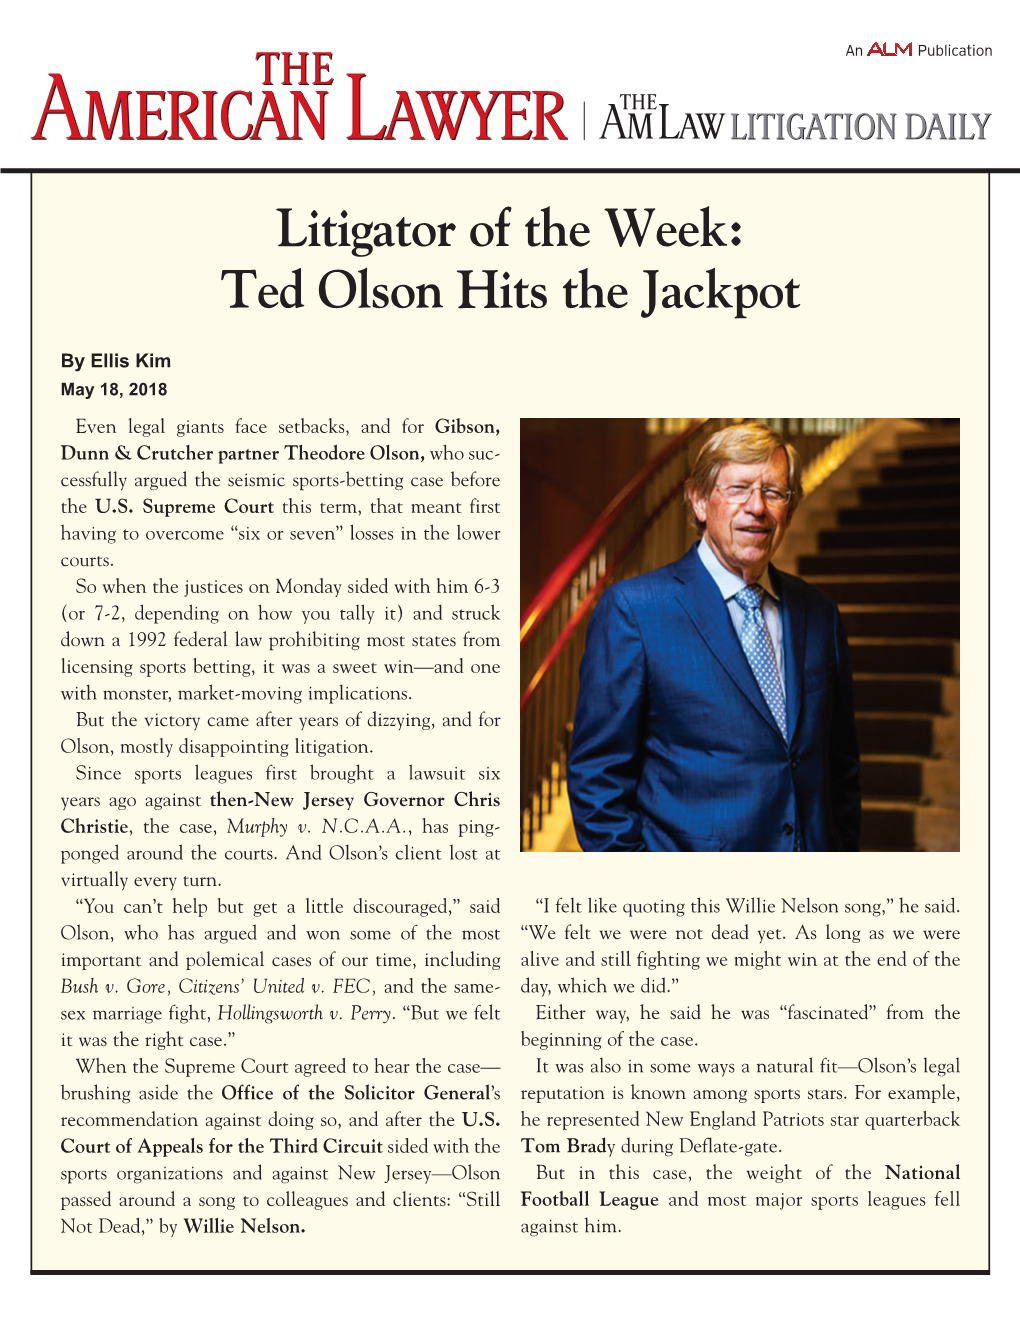 Litigator of the Week: Ted Olson Hits the Jackpot